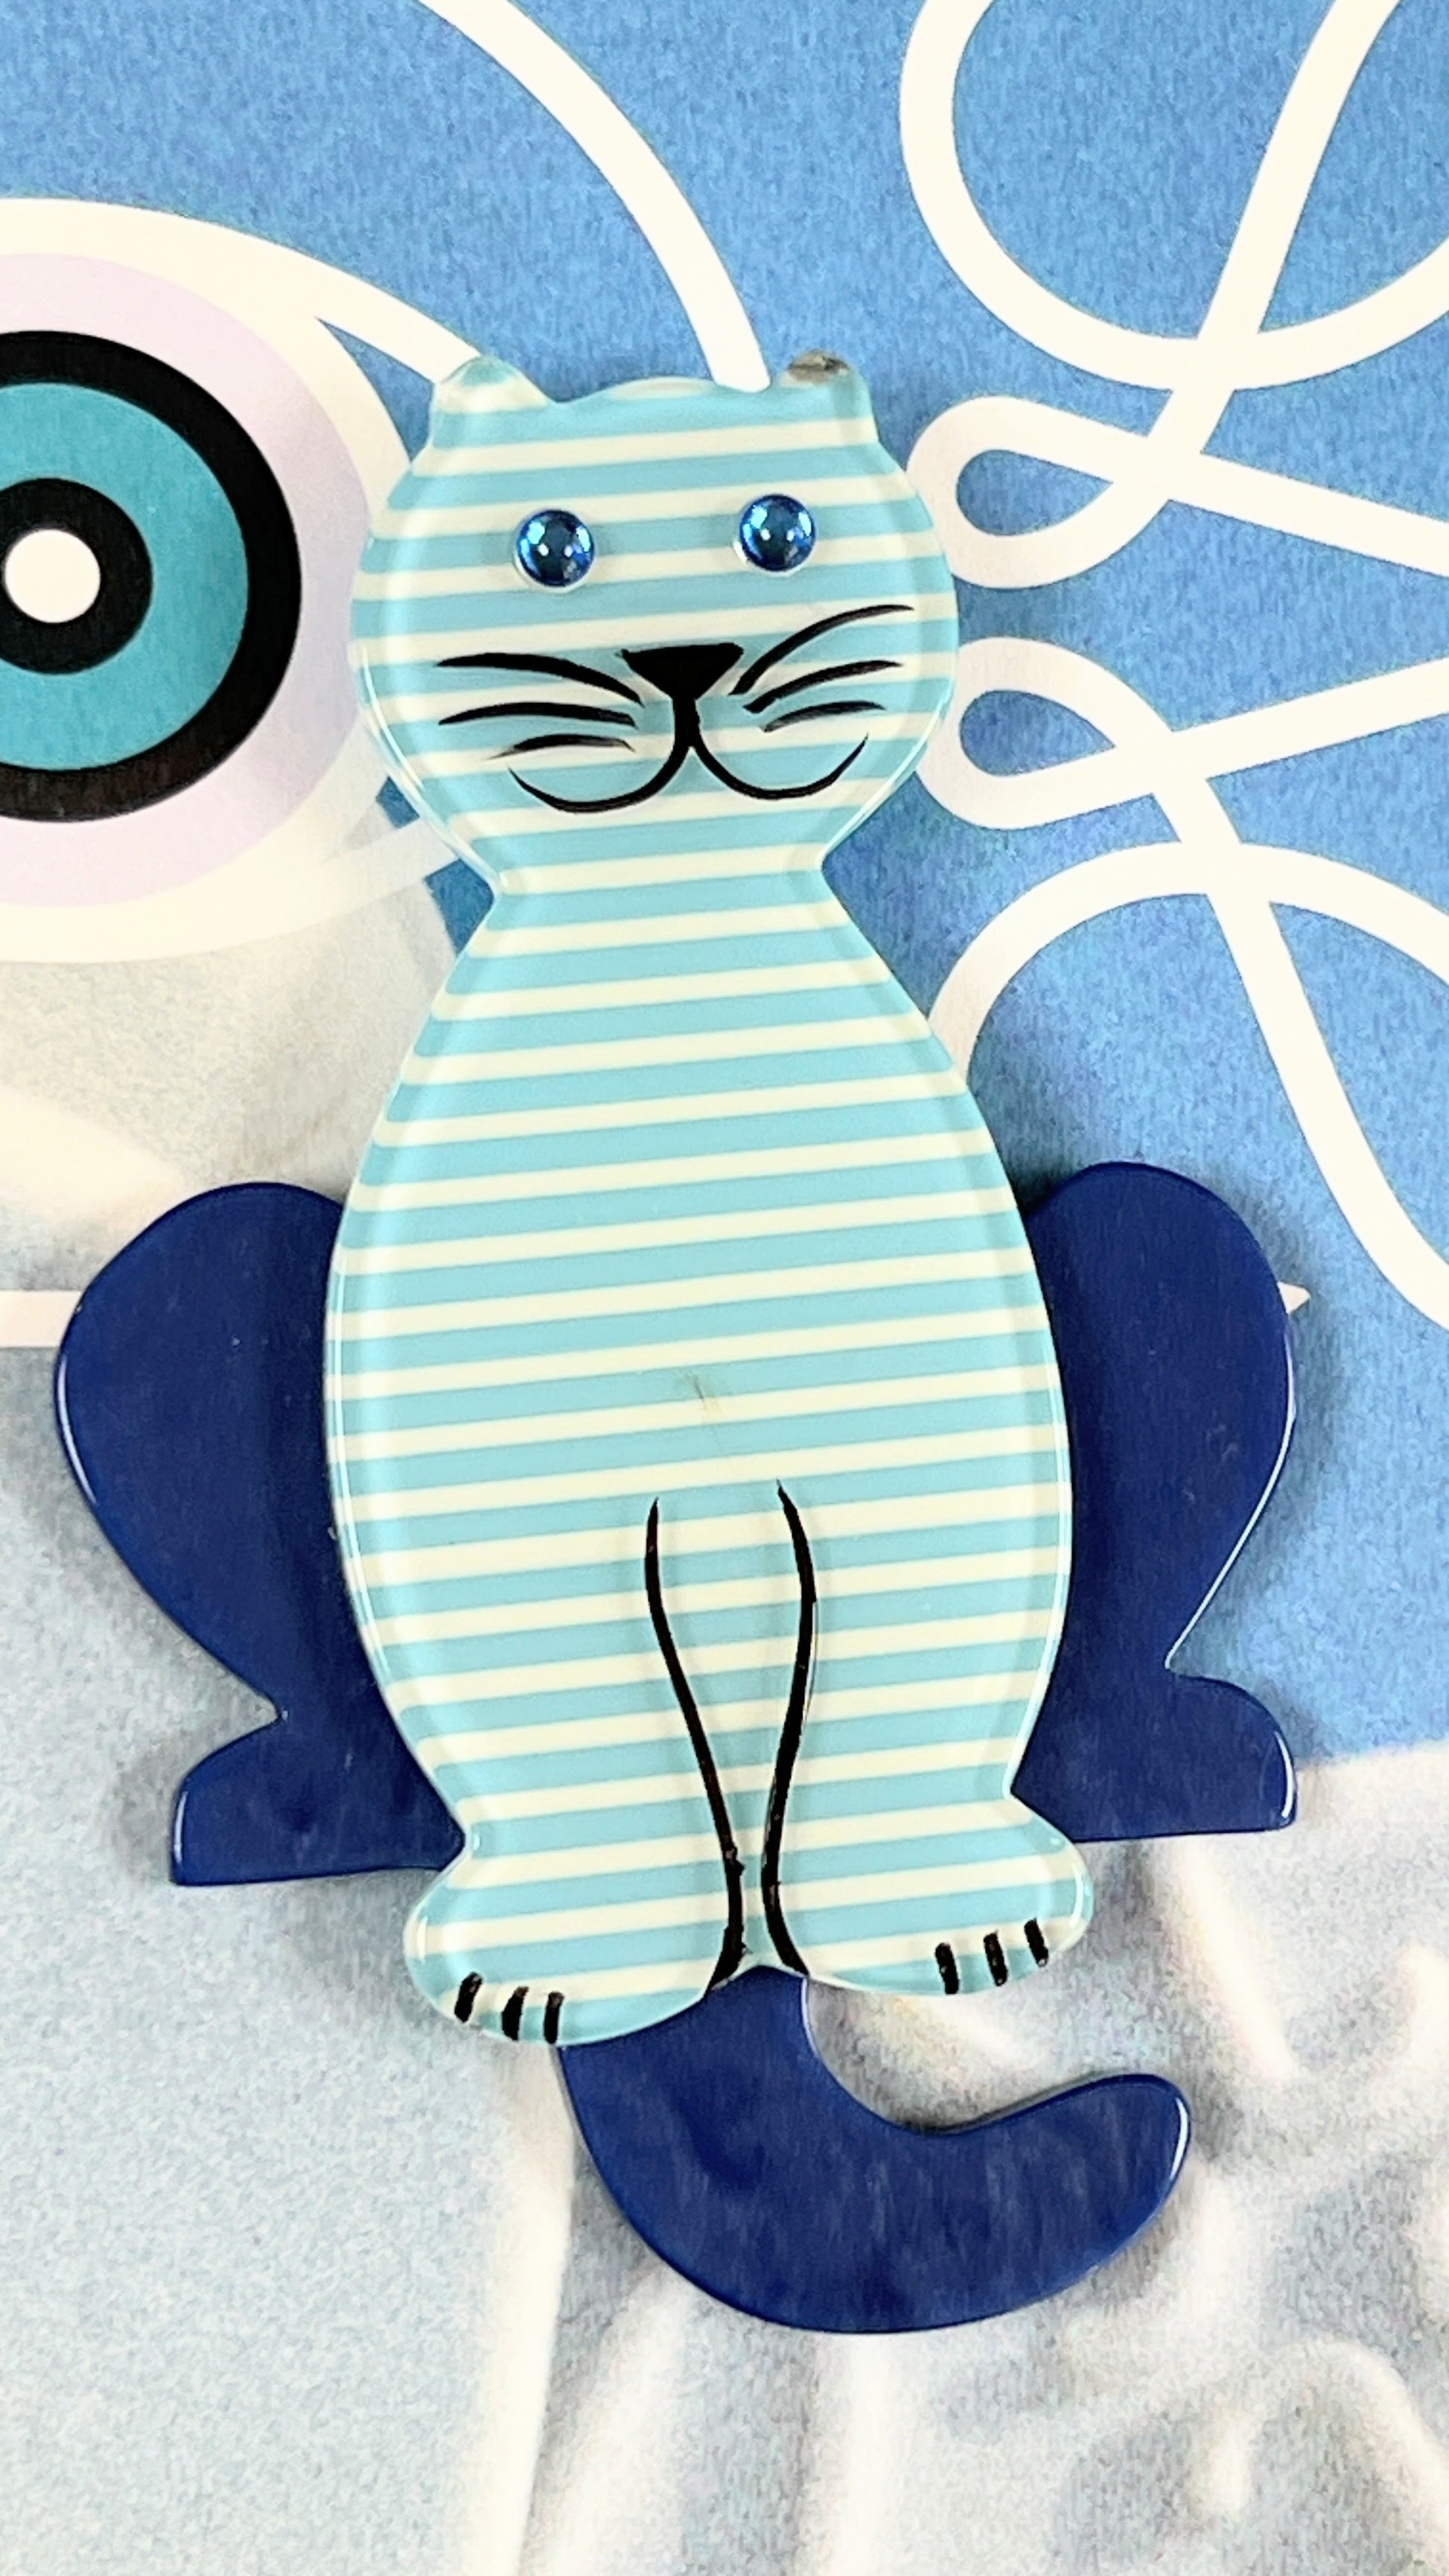 Stiped Sky Blue and Blue Lucifer Cat brooch